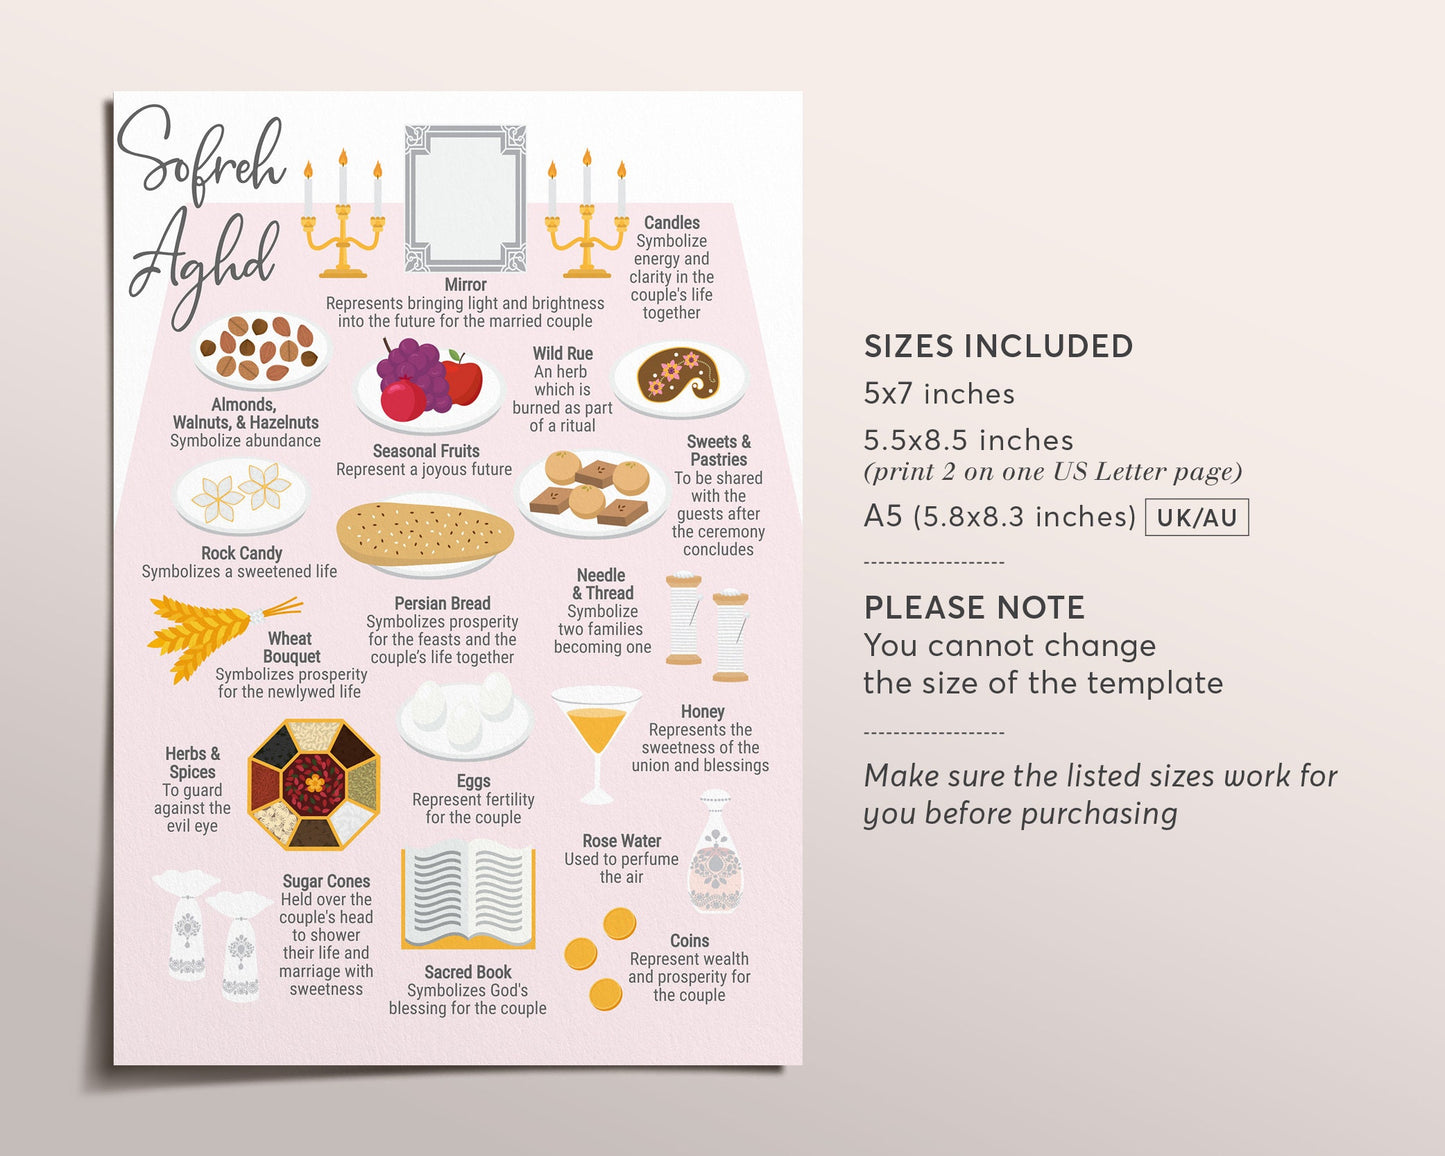 Editable Sofreh Aghd Guide, Persian Ceremony, Editable Persian Template, Persian Wedding Ceremony, Persian Wedding Items